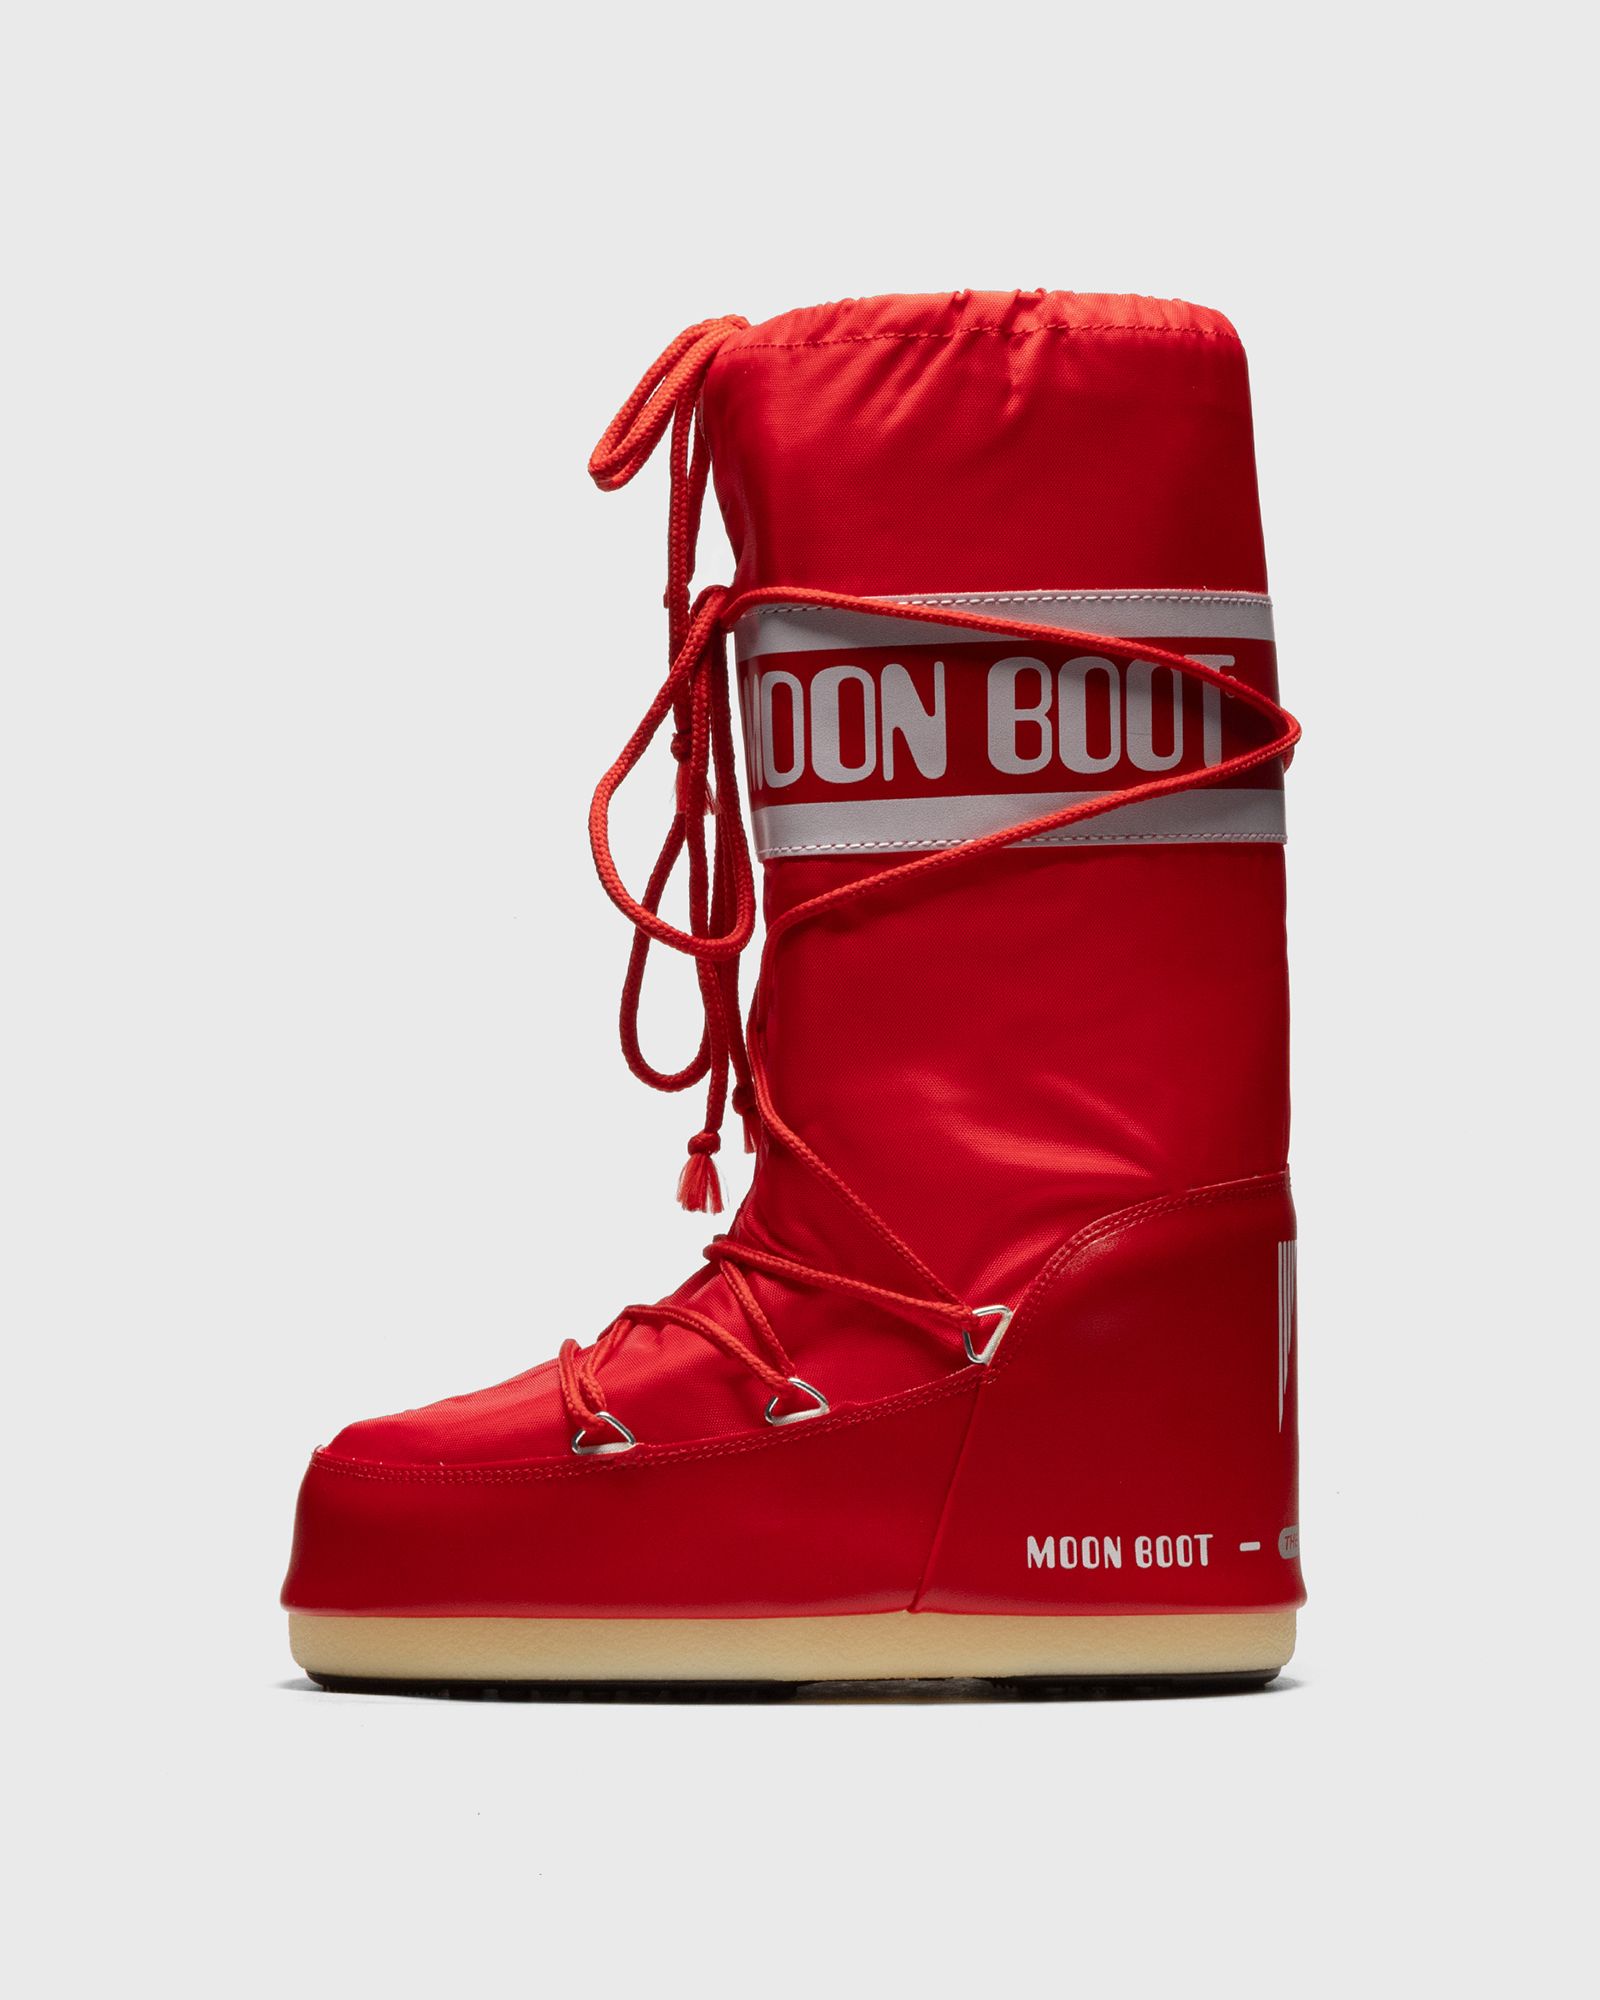 Moon Boot - icon nylon men boots red in größe:42-44